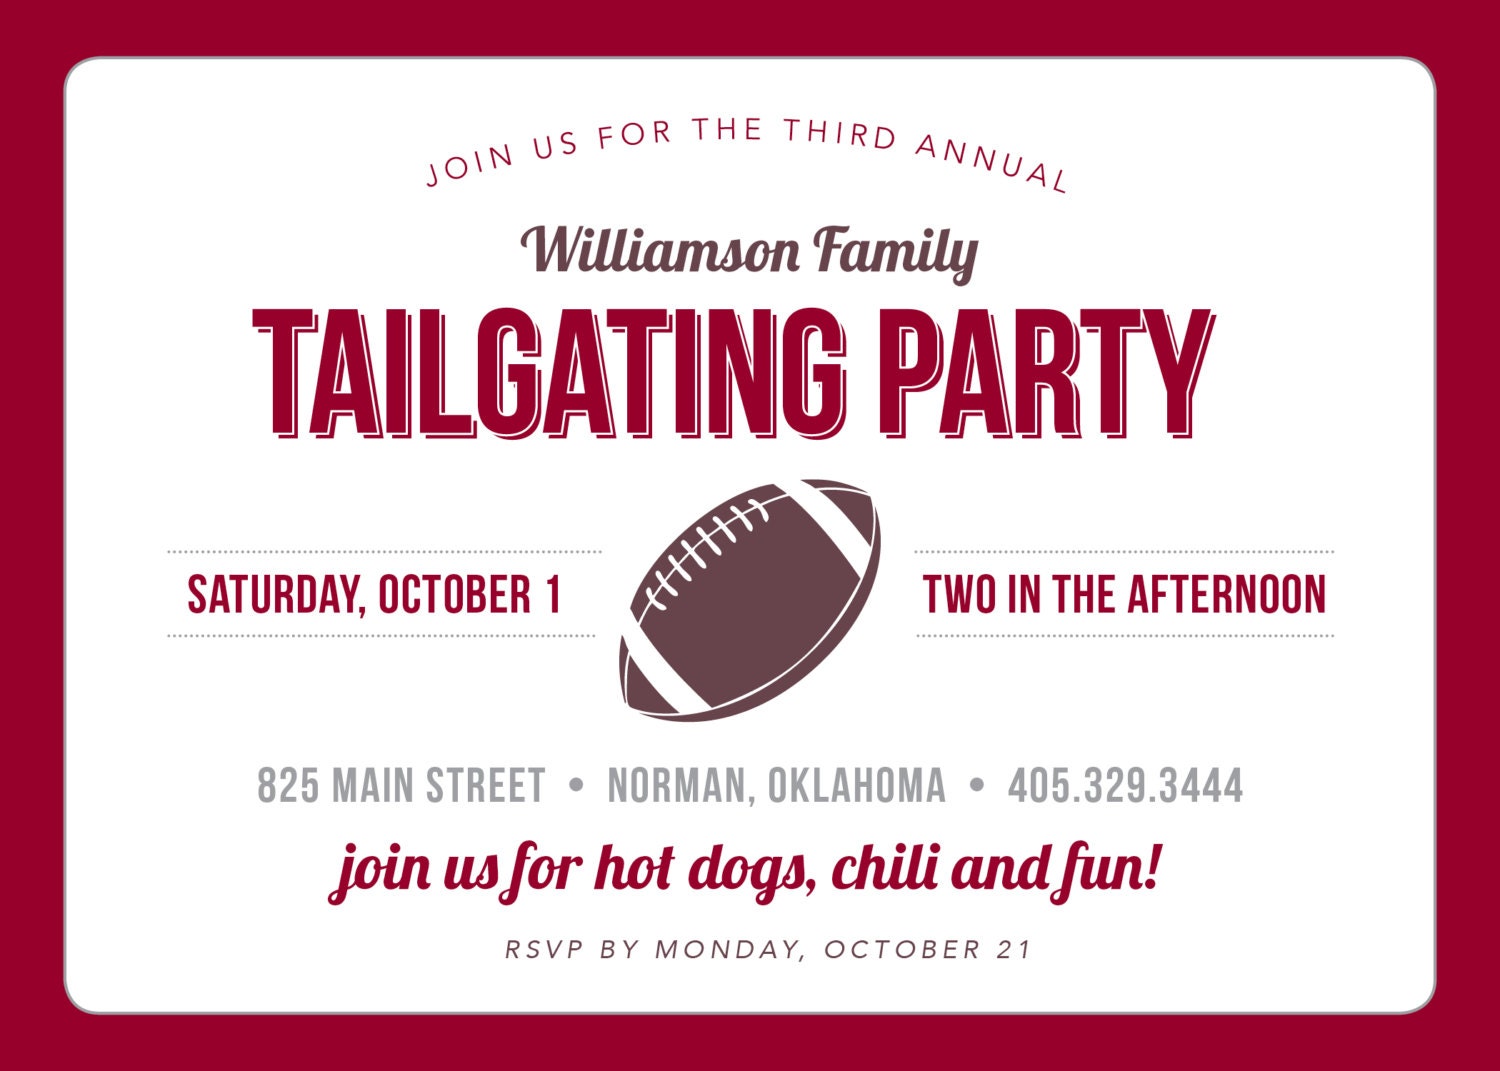 tailgate-party-invitation-by-touiesdesign-on-etsy